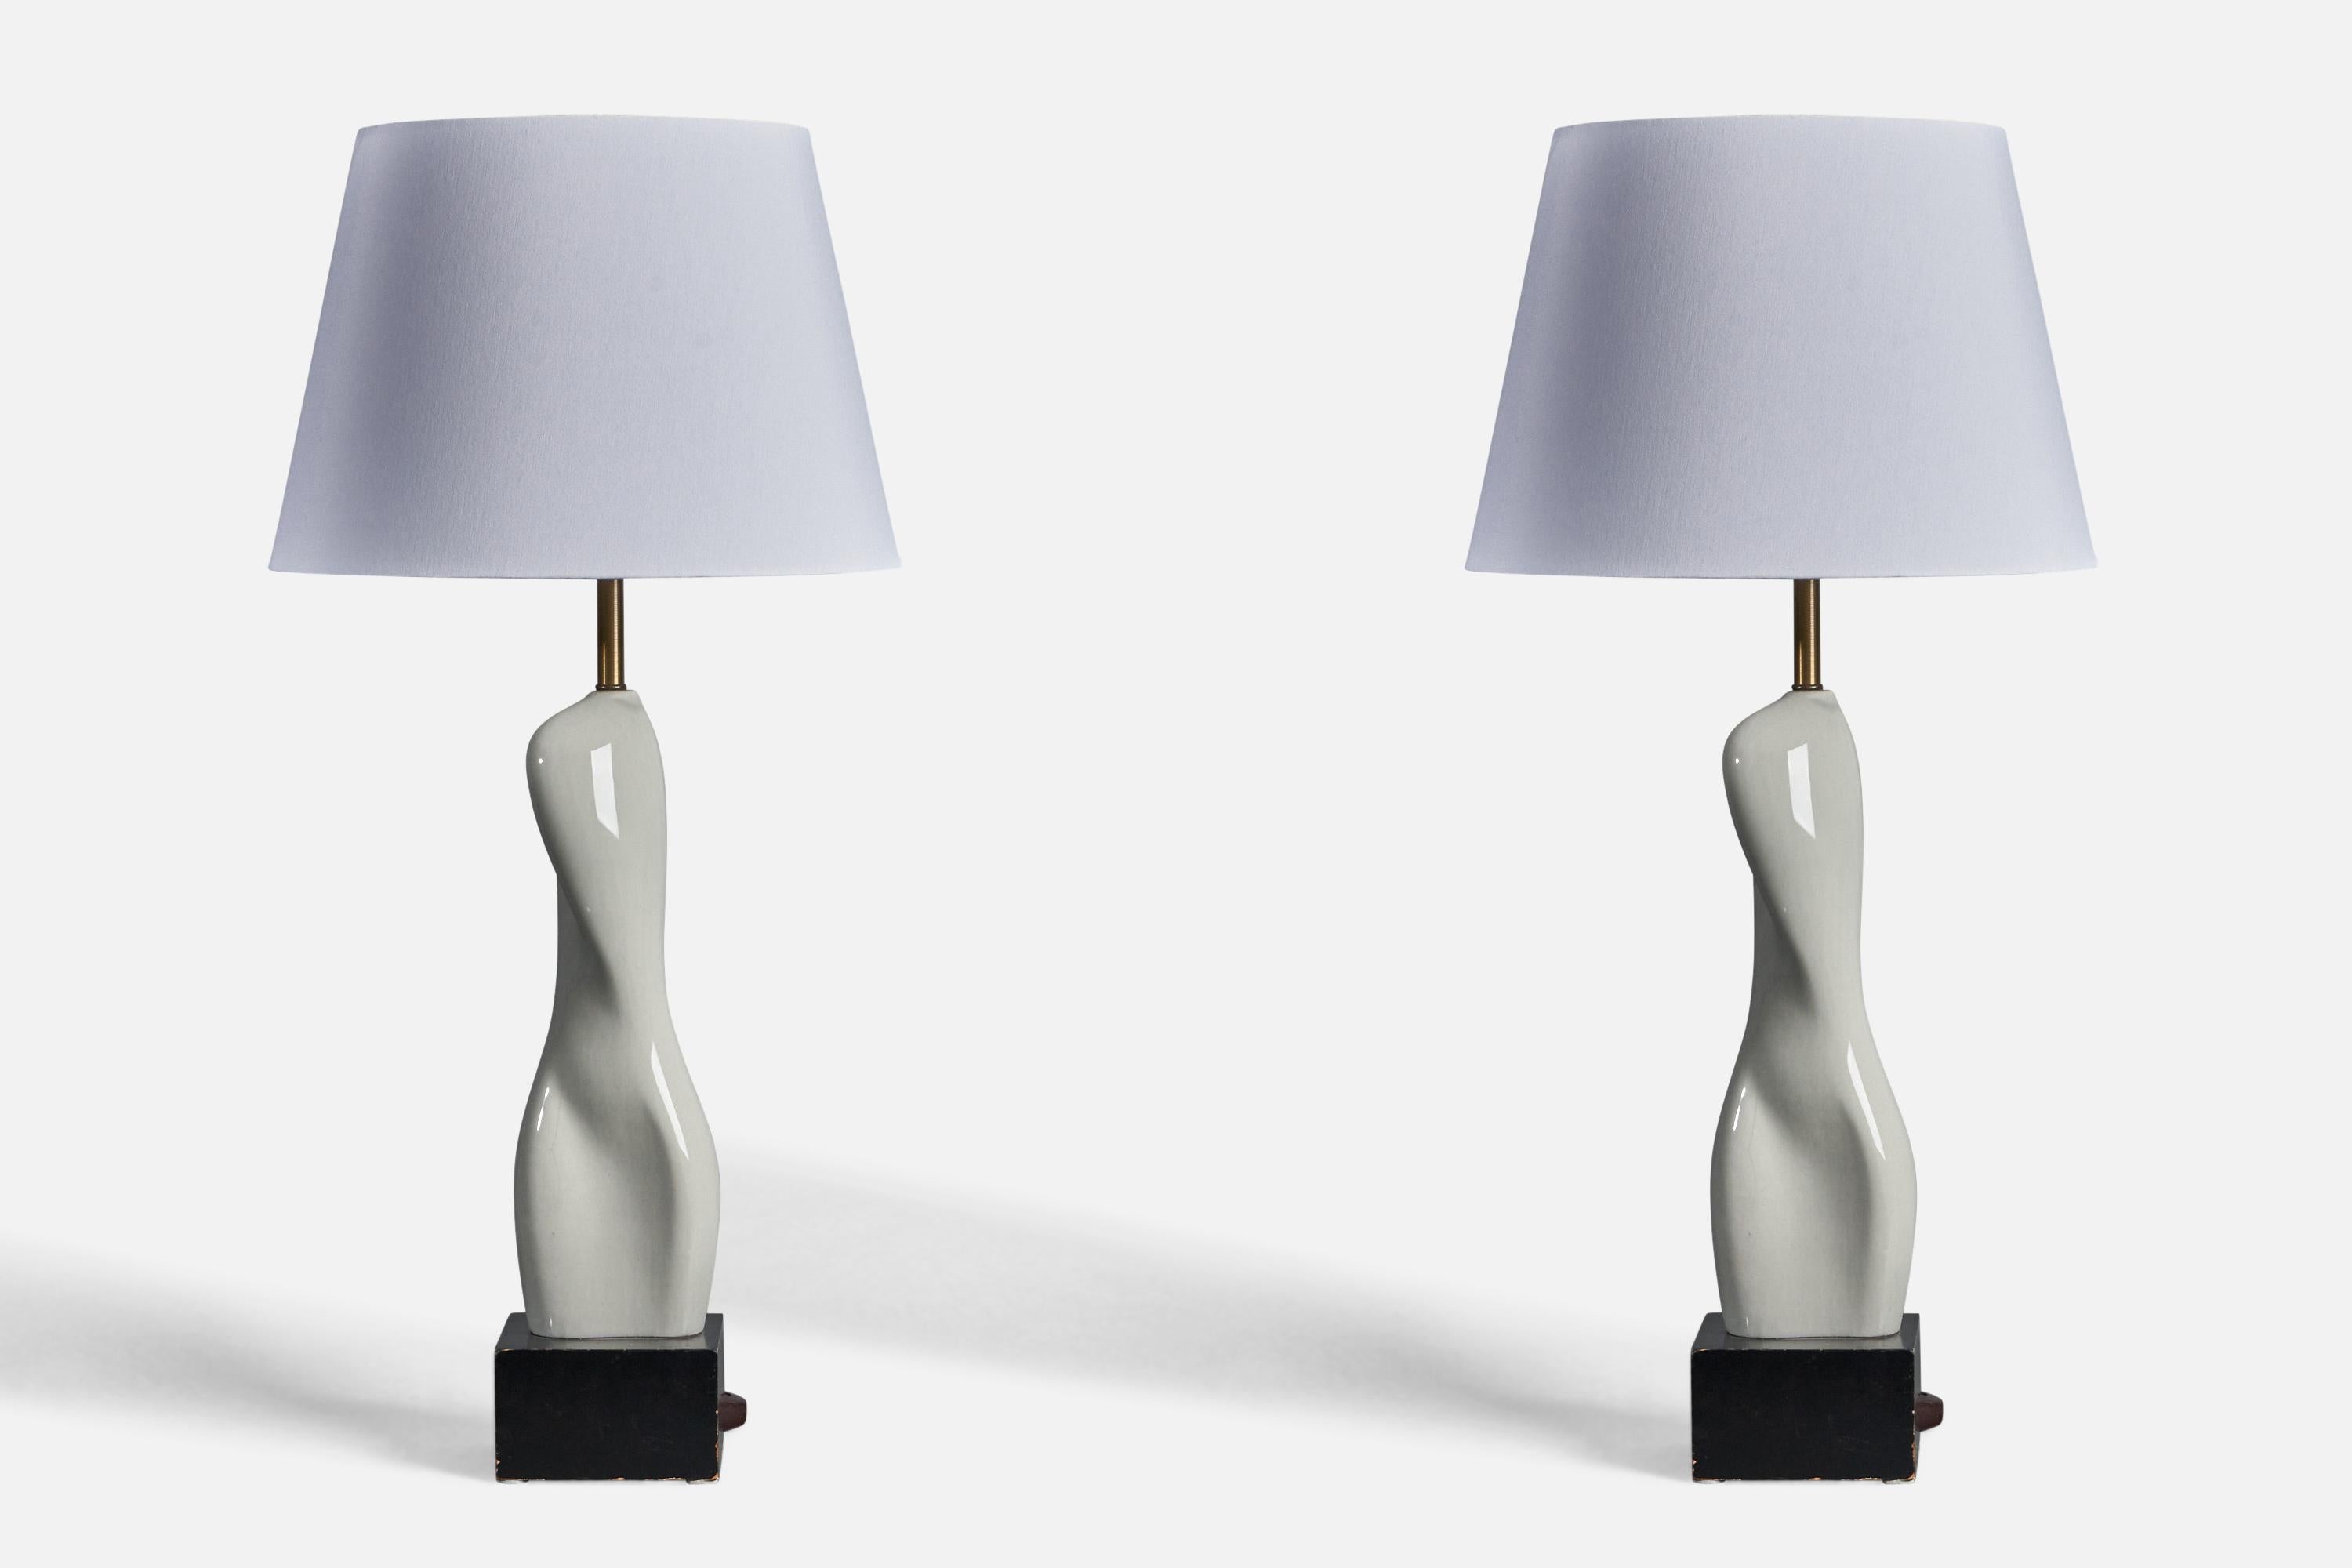 A pair of freeform grey-glazed ceramic, brass and black-lacquered wood table lamps, designed by Russel Wright, USA, 1940s.

Dimensions of Lamp (inches): 29.75” H x 8” Diameter
Dimensions of Shade (inches): 10